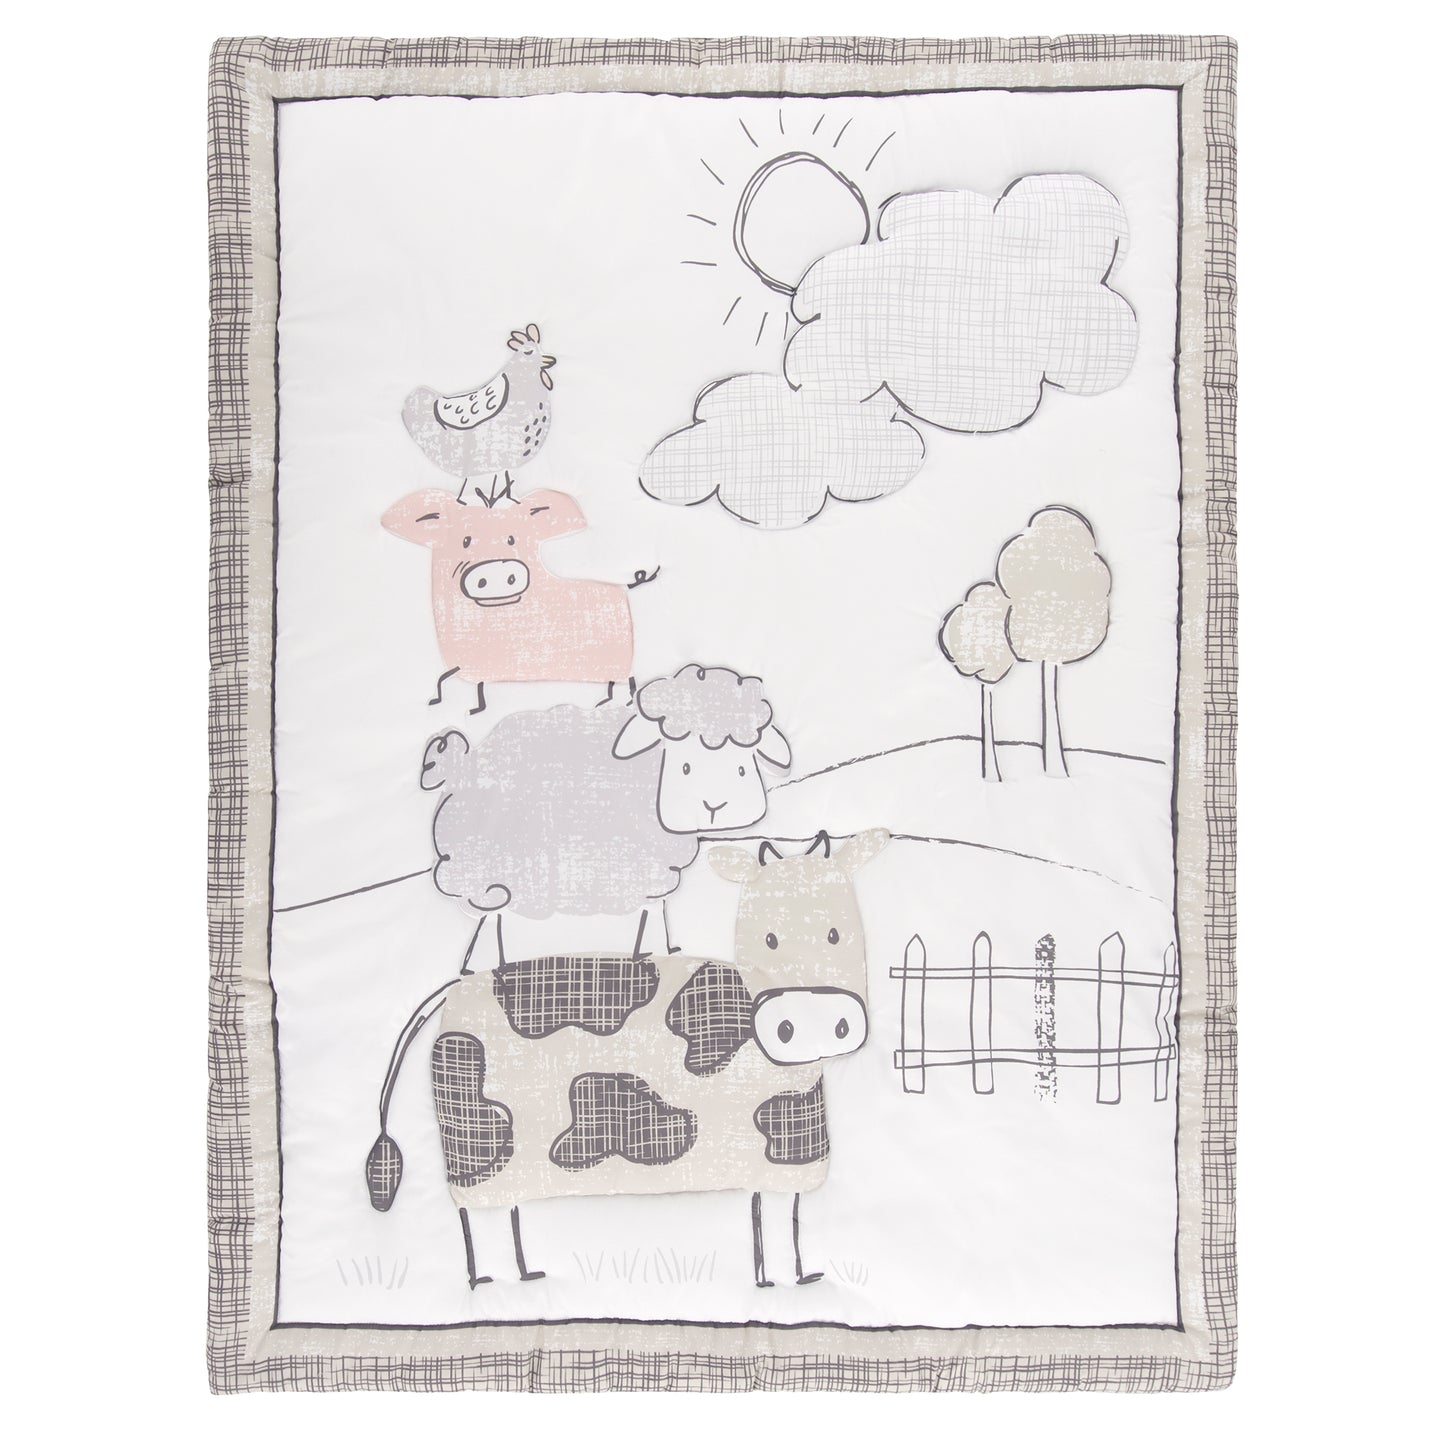 Cottage Farm Nursery Quilt; features a cow sheep pig and chicken out playing in a simple pasture